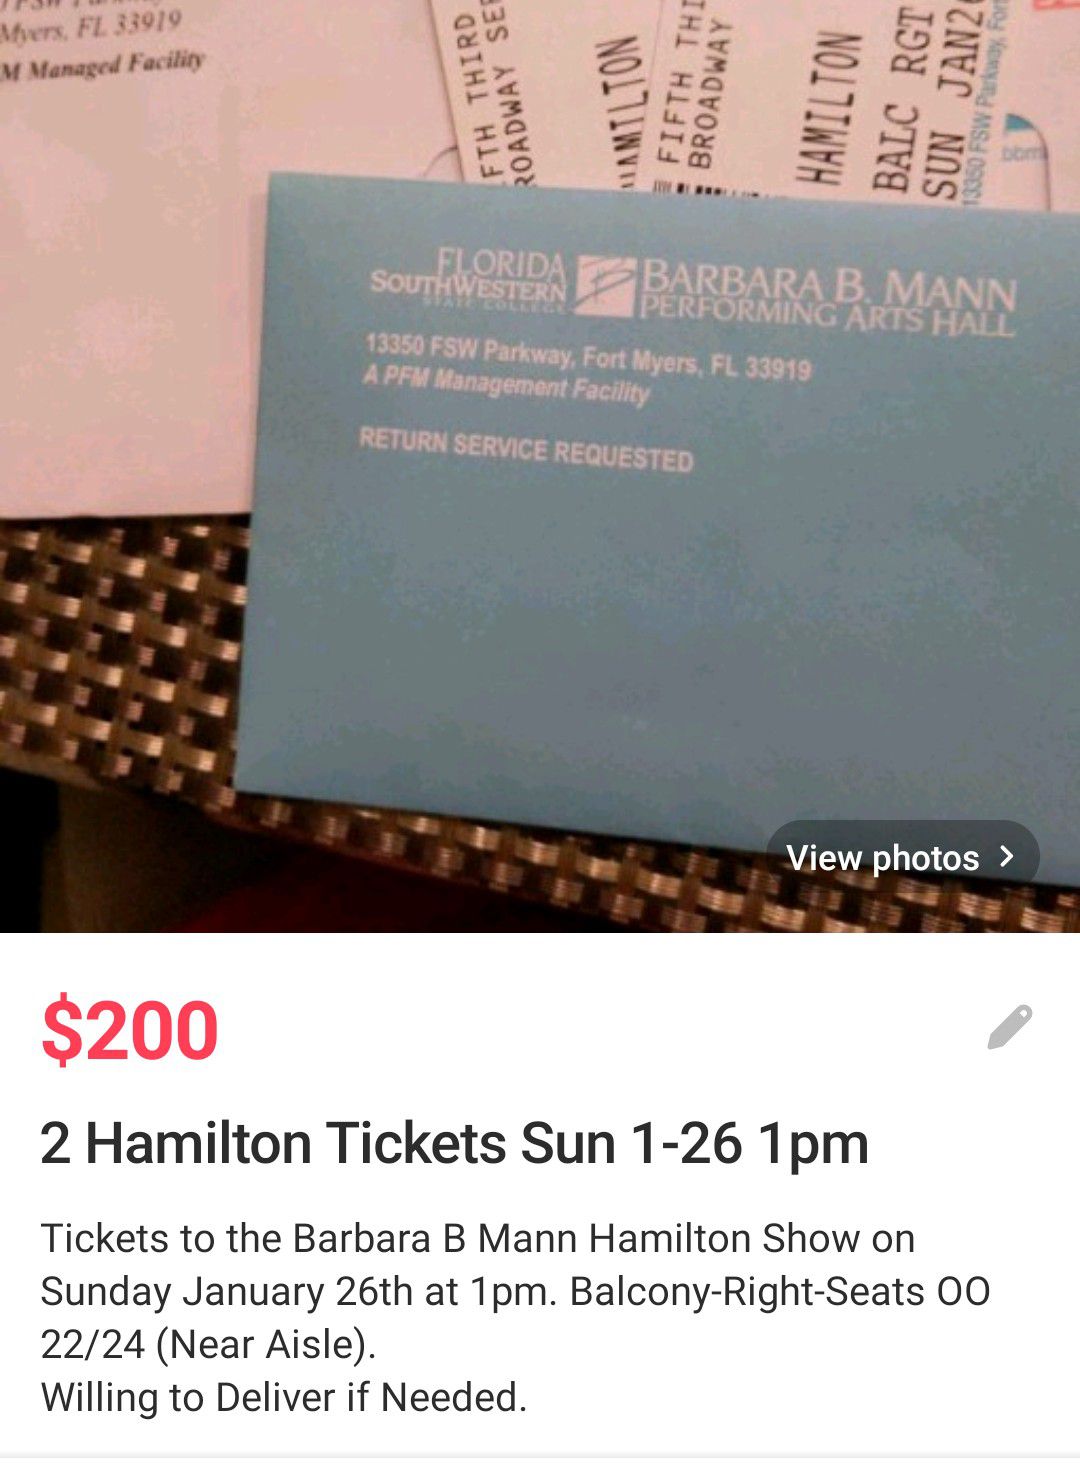 Sold out Broadway Hamilton Show for Sunday 1/26